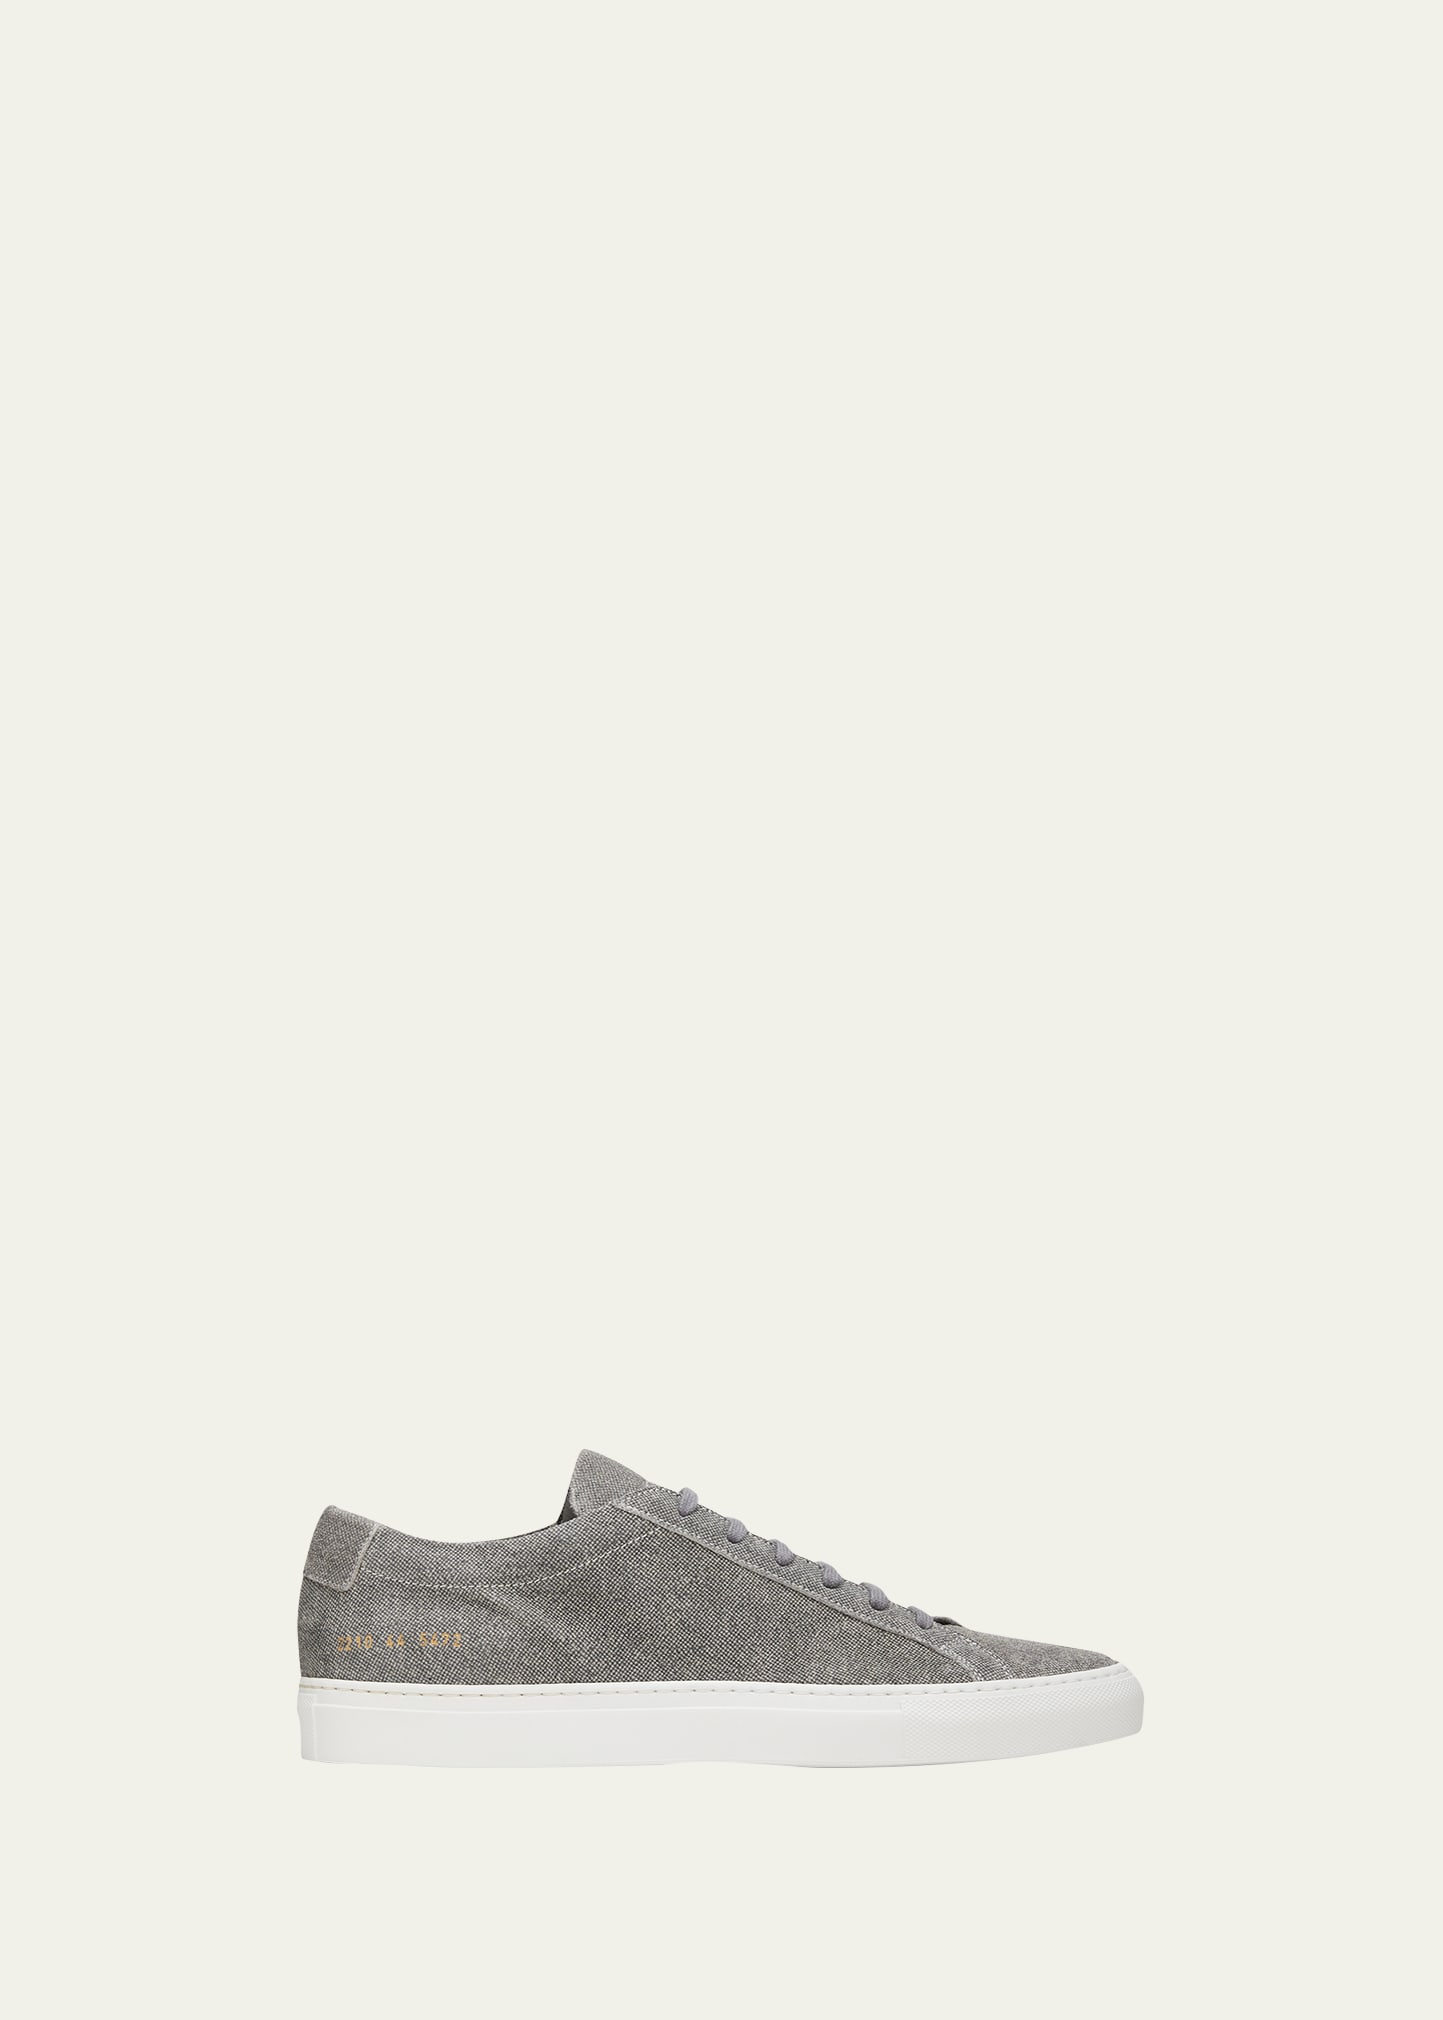 Common Projects Men's Achilles Patterned Suede Low-Top Sneakers